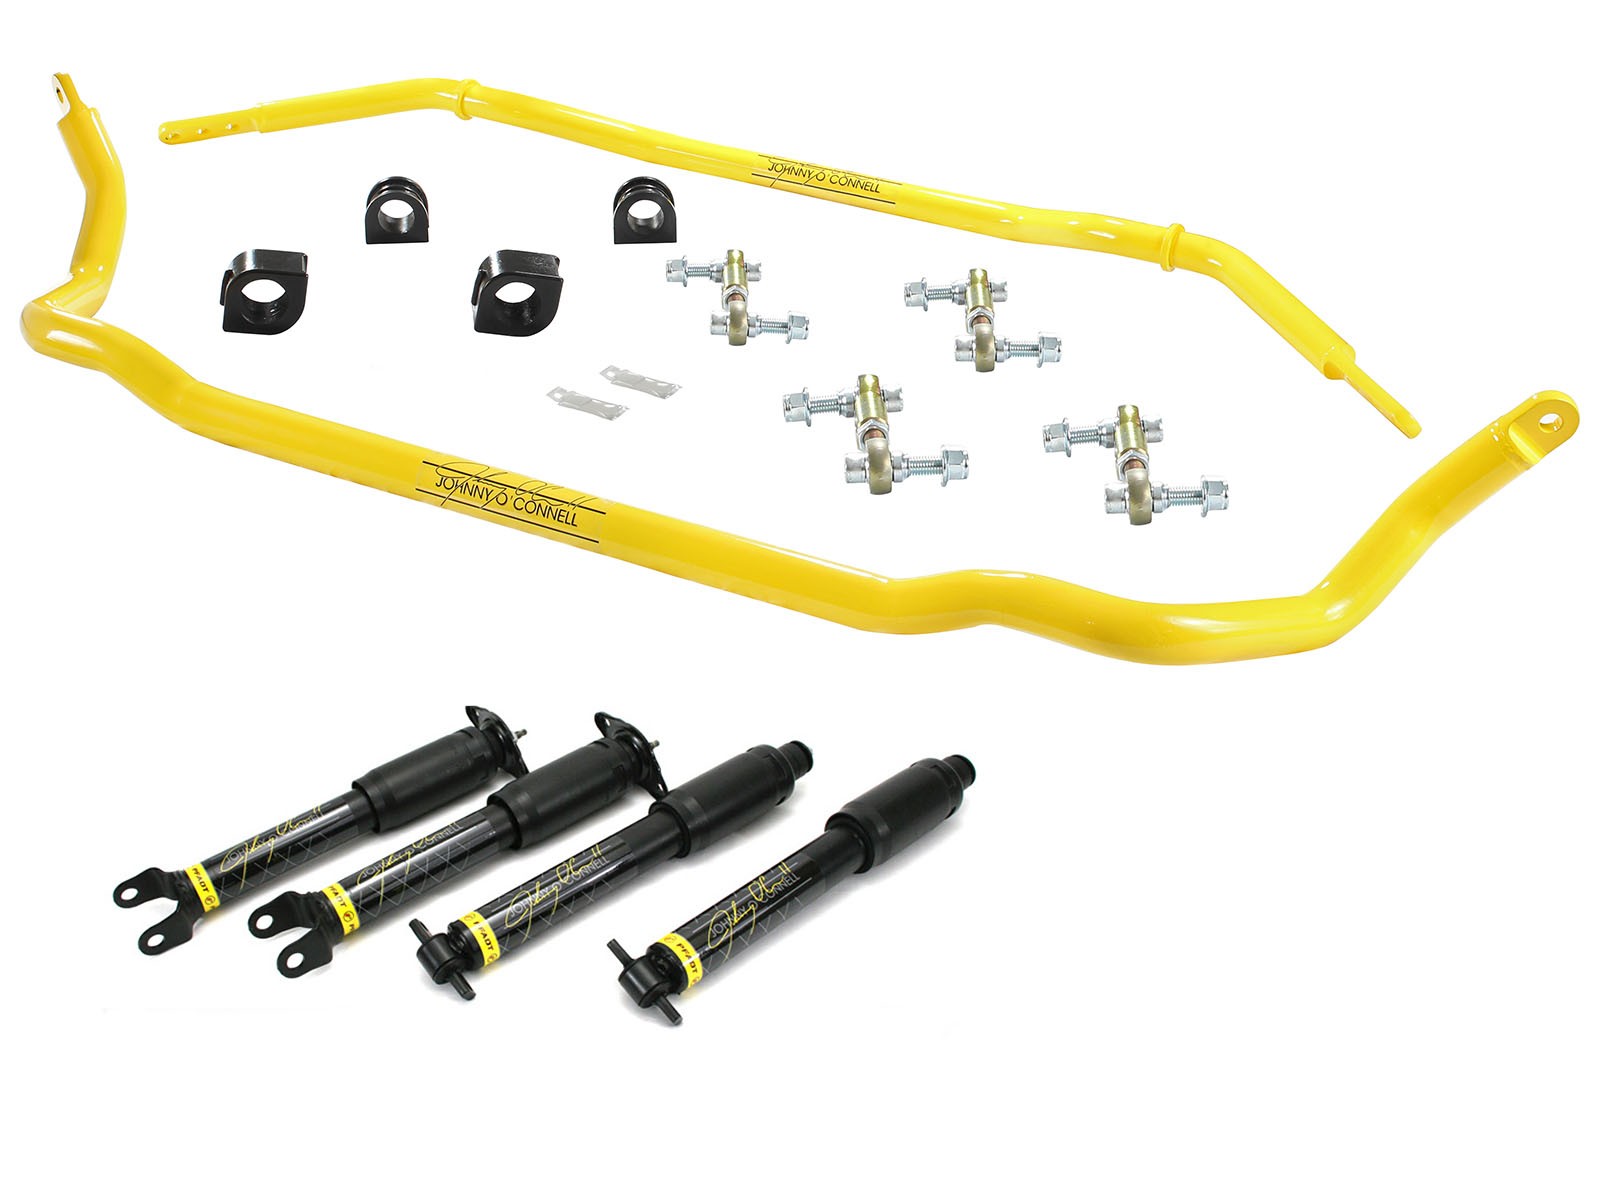 1997-2013 C5/C6 Corvette aFe Power aFe Control Johnny O'Connell Stage 1 Suspension Package